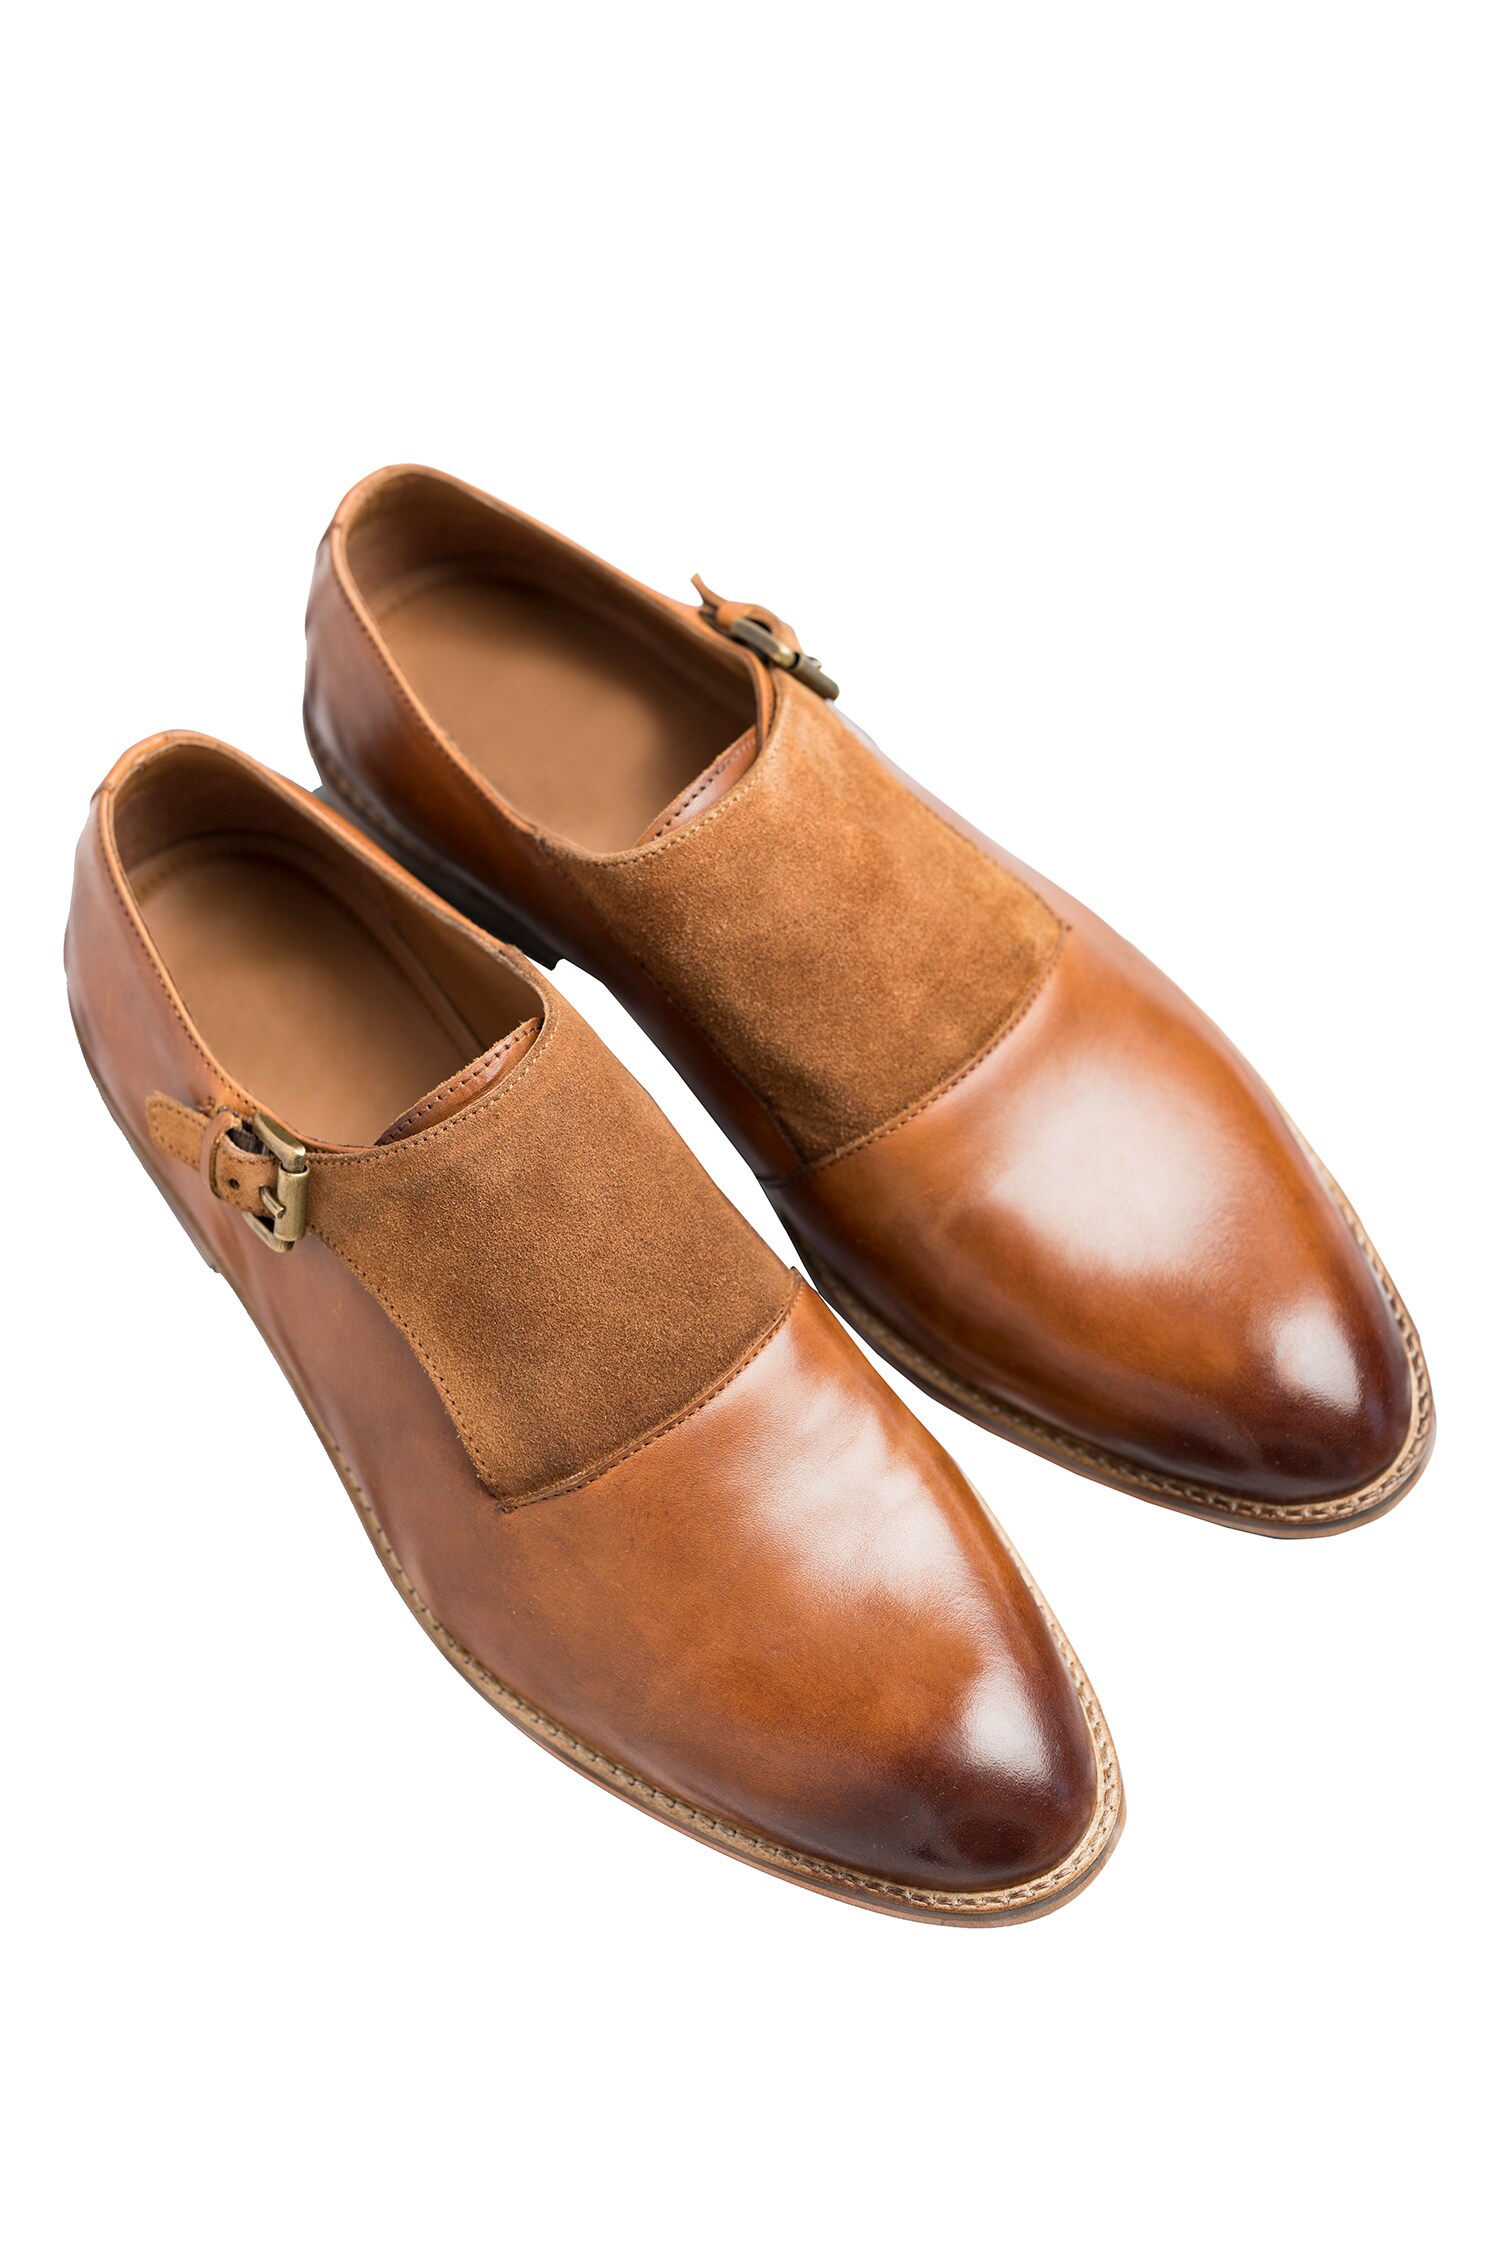 Dmodot Brown Suede Hand Polished Monk Shoes